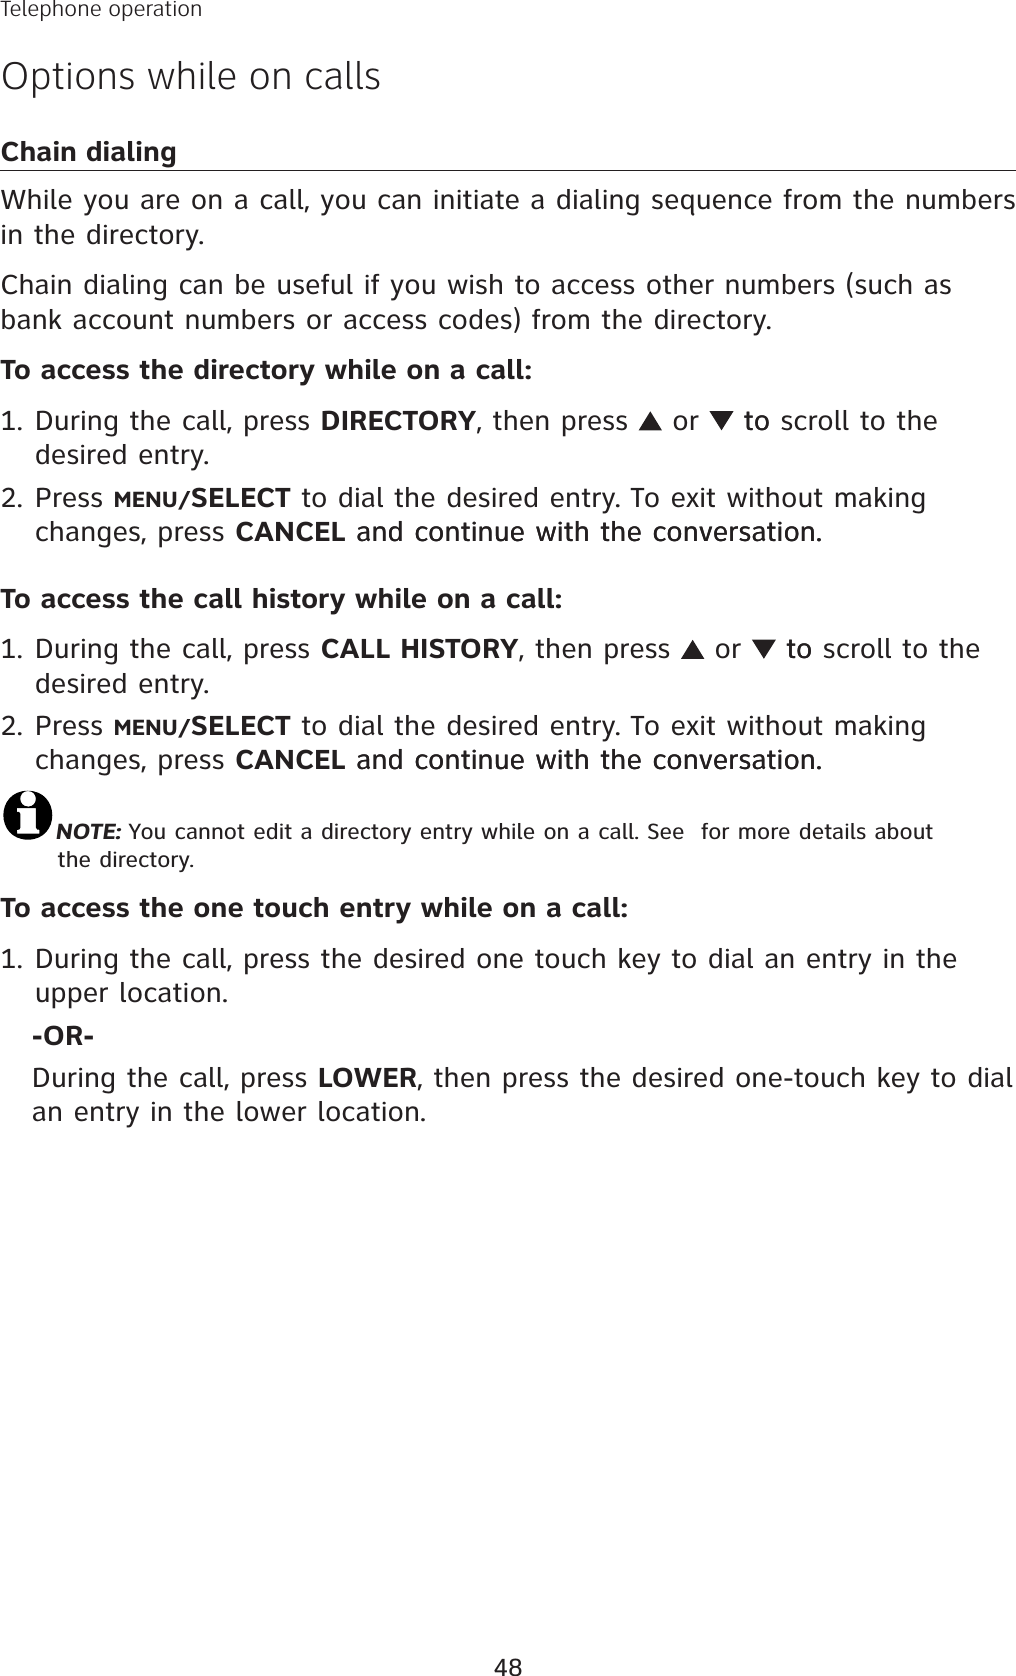 48Telephone operationOptions while on callsChain dialingWhile you are on a call, you can initiate a dialing sequence from the numbers in the directory. Chain dialing can be useful if you wish to access other numbers (such as bank account numbers or access codes) from the directory. To access the directory while on a call: During the call, press DIRECTORY, then press   or  toto scroll to the desired entry. Press MENU/SELECT to dial the desired entry. To exit without making changes, press CANCEL and continue with the conversation.and continue with the conversation.To access the call history while on a call: During the call, press CALL HISTORY, then press   or  toto scroll to the desired entry. Press MENU/SELECT to dial the desired entry. To exit without making changes, press CANCEL and continue with the conversation.and continue with the conversation.NOTE: You cannot edit a directory entry while on a call. See  for more details about the directory.To access the one touch entry while on a call: During the call, press the desired one touch key to dial an entry in the upper location. -OR-During the call, press LOWER, then press the desired one-touch key to dialan entry in the lower location.1.2.1.2.1.